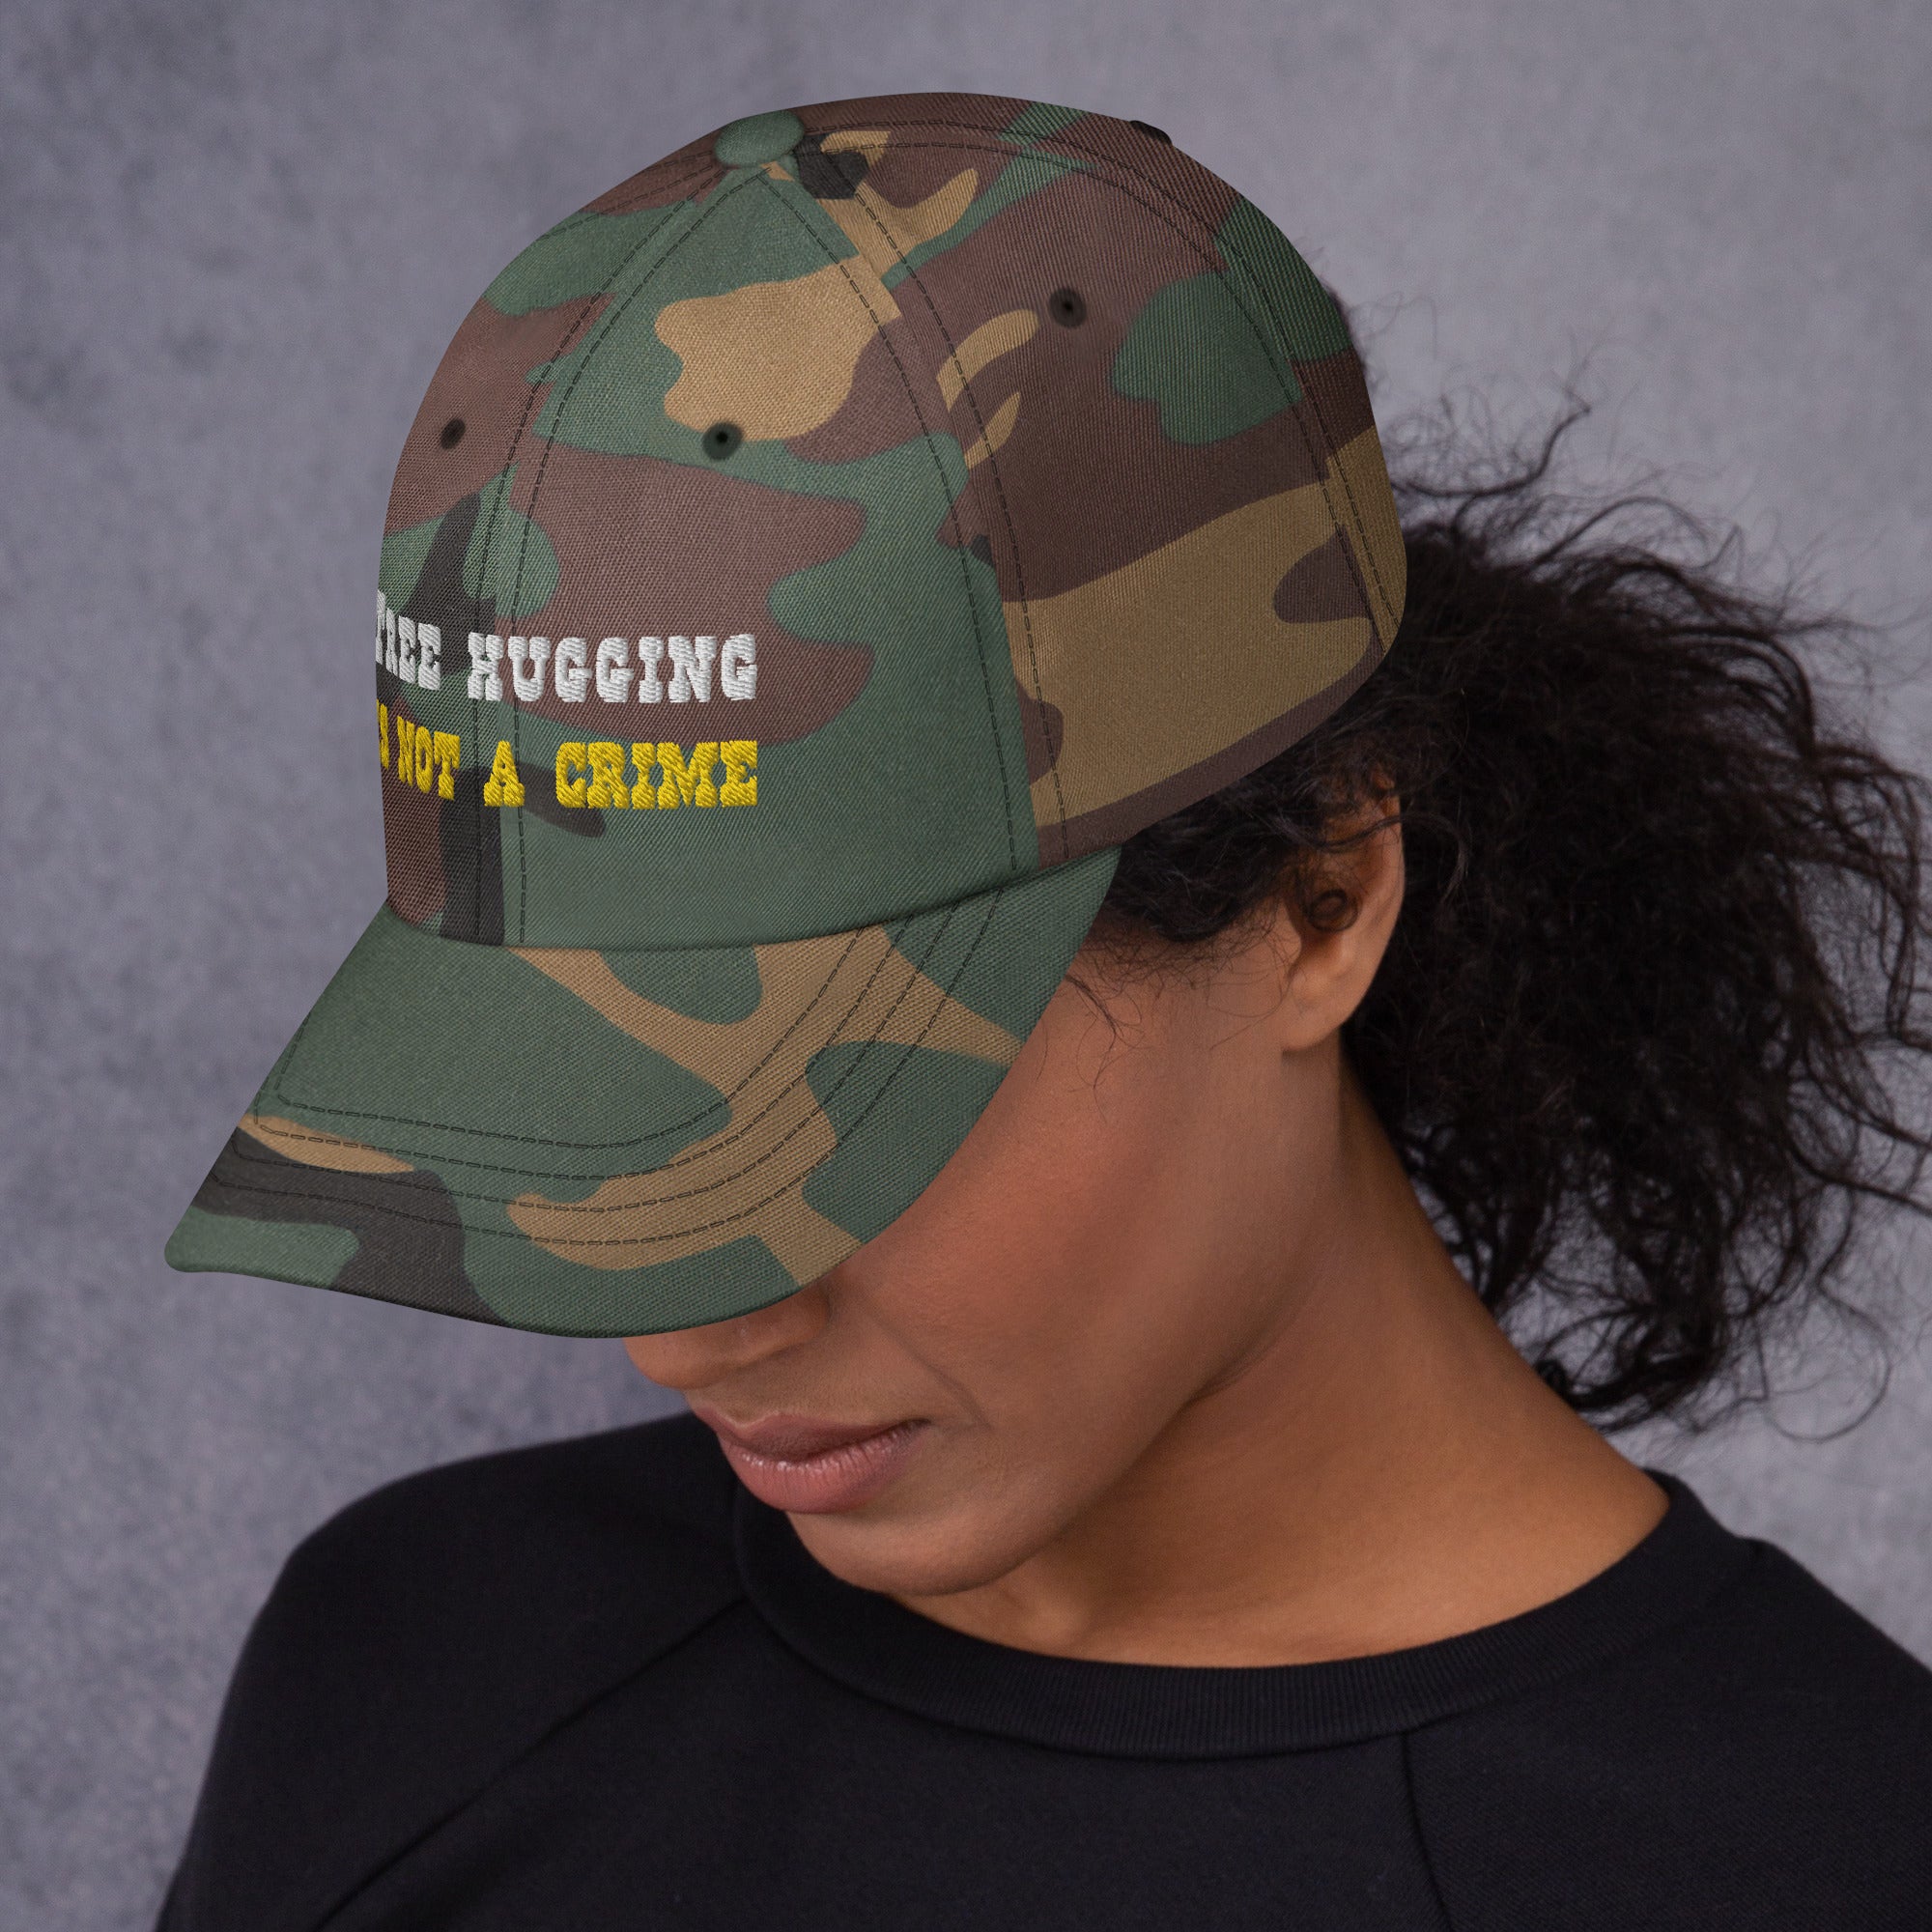 Casquette de Baseball camouflage Tree Hugging is not a crime White/Gold